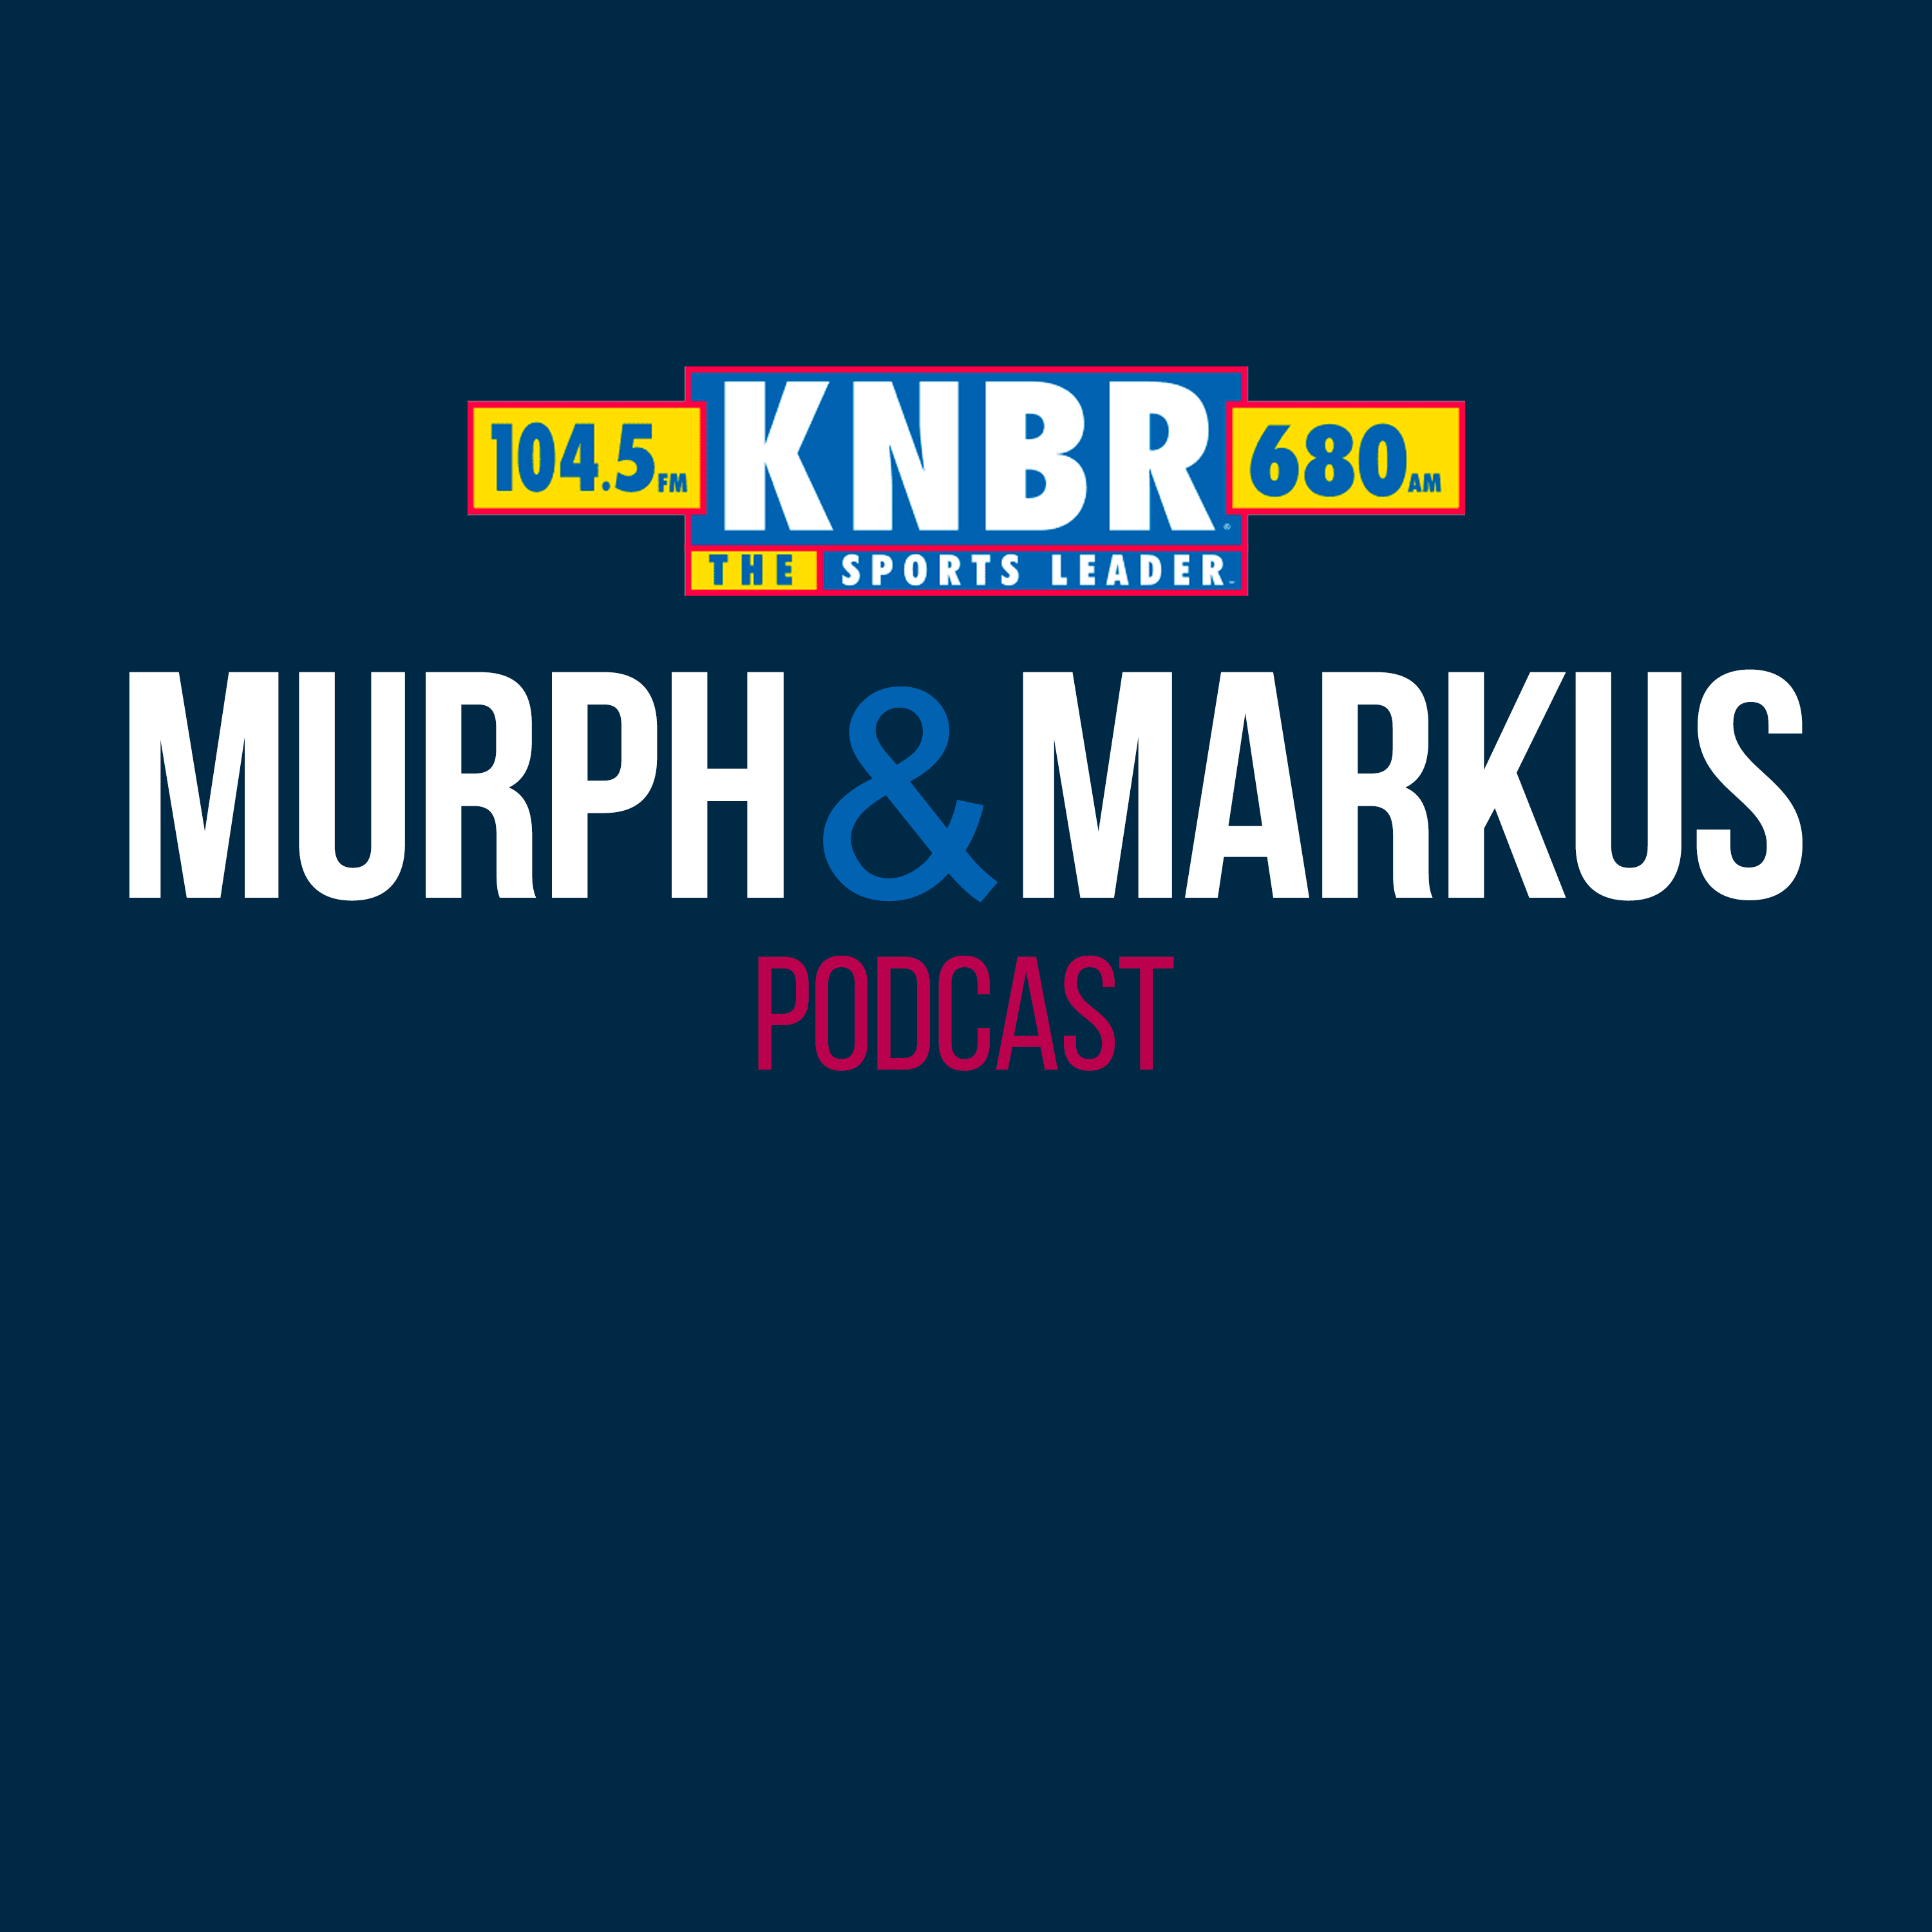 6-12 Hour 1: Murph & Markus share their thoughts on the lack of offense from the Giants last night, discuss Mauricio Dubón's revenge series, and react to the passing of Jerry West